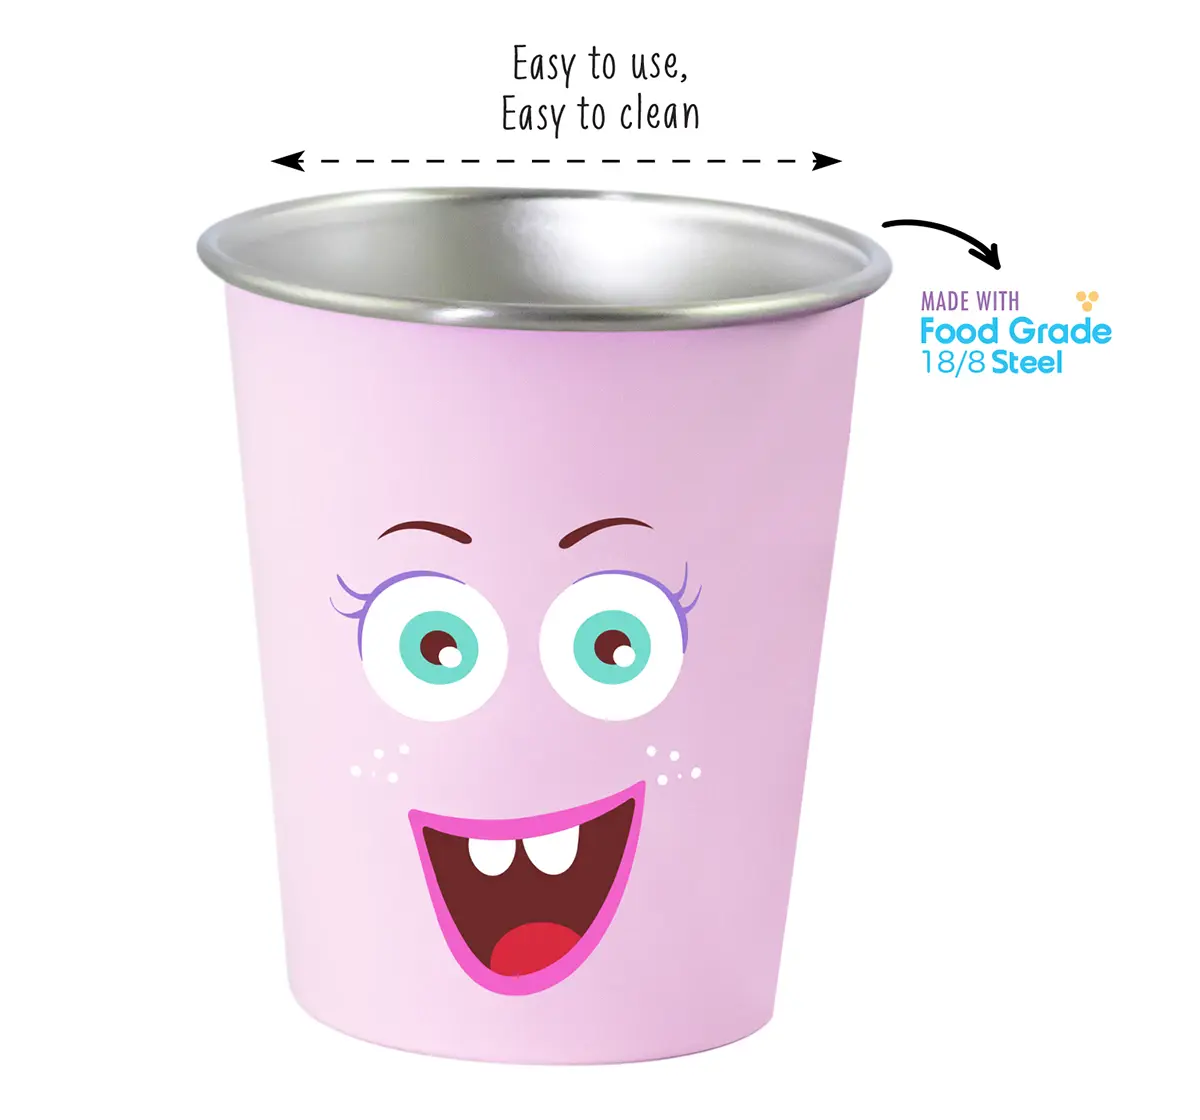 Rabitat Spill Free Stainless Steel Cup, Pink, Miss Butters, 5Y+